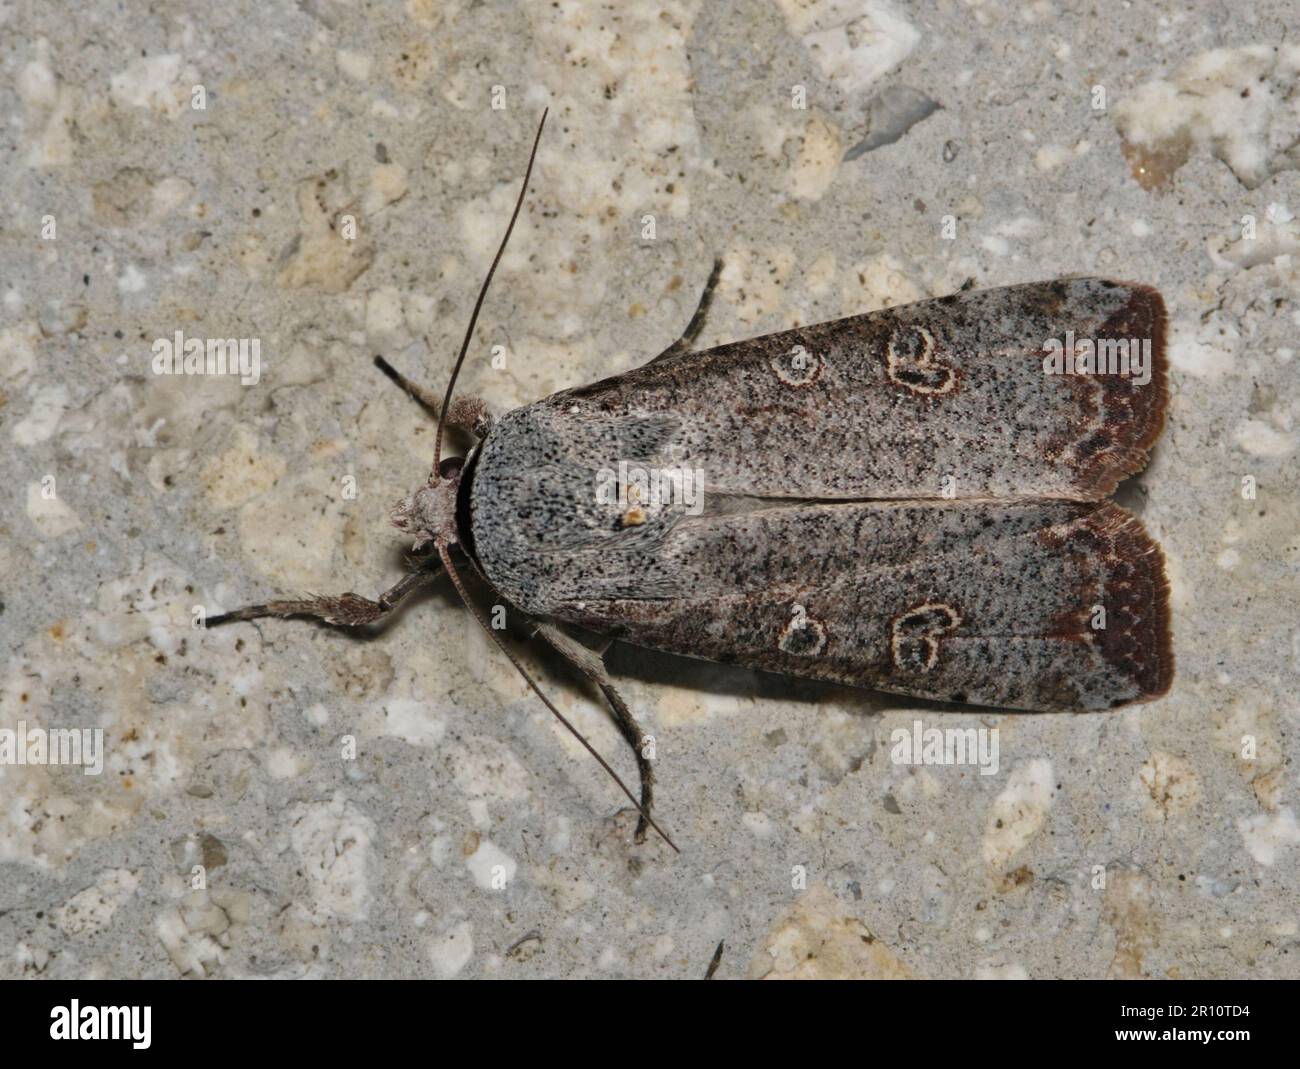 Green Cutworm Moth (Anicla infecta) dorsal view on a cement wall. Destructive insect pest species found in the USA, Canada and Uruguay. Stock Photo